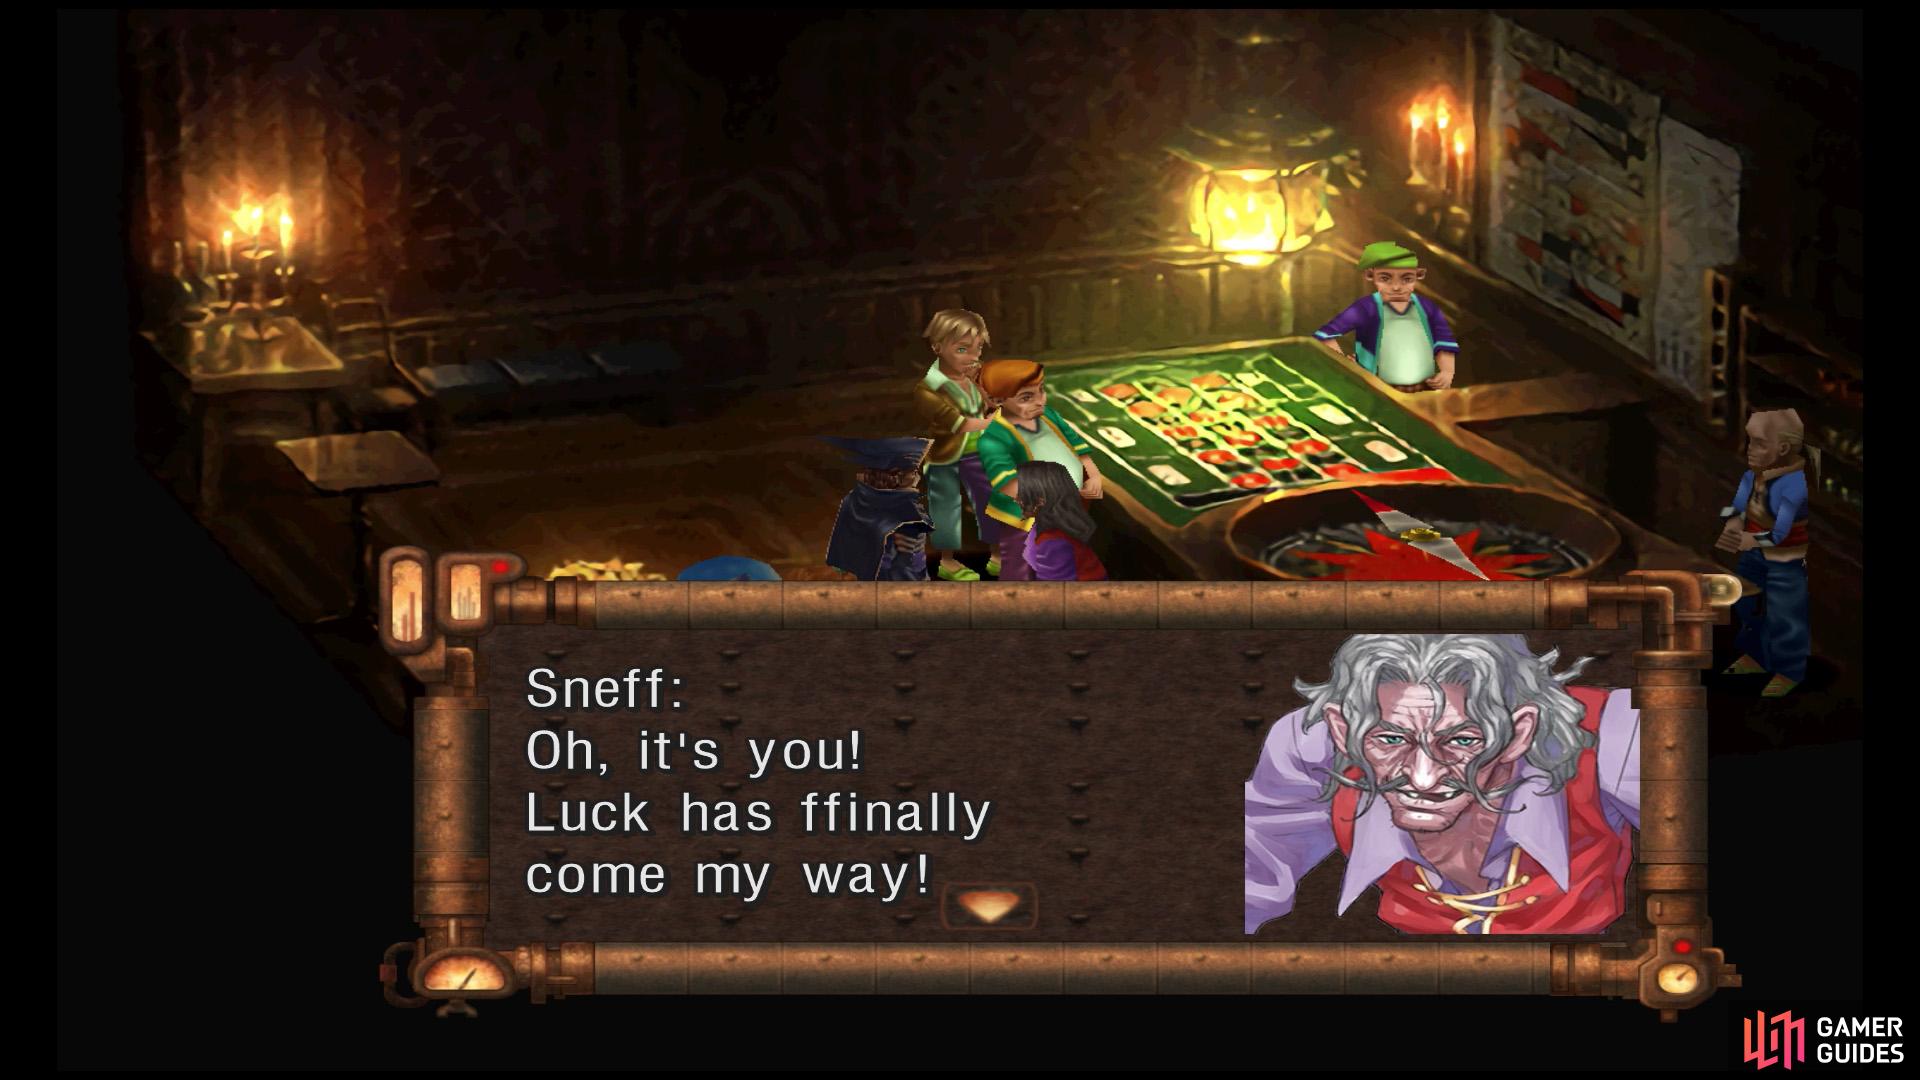 After beating the Sage, check the casino to find Sneff hitting the jackpot.